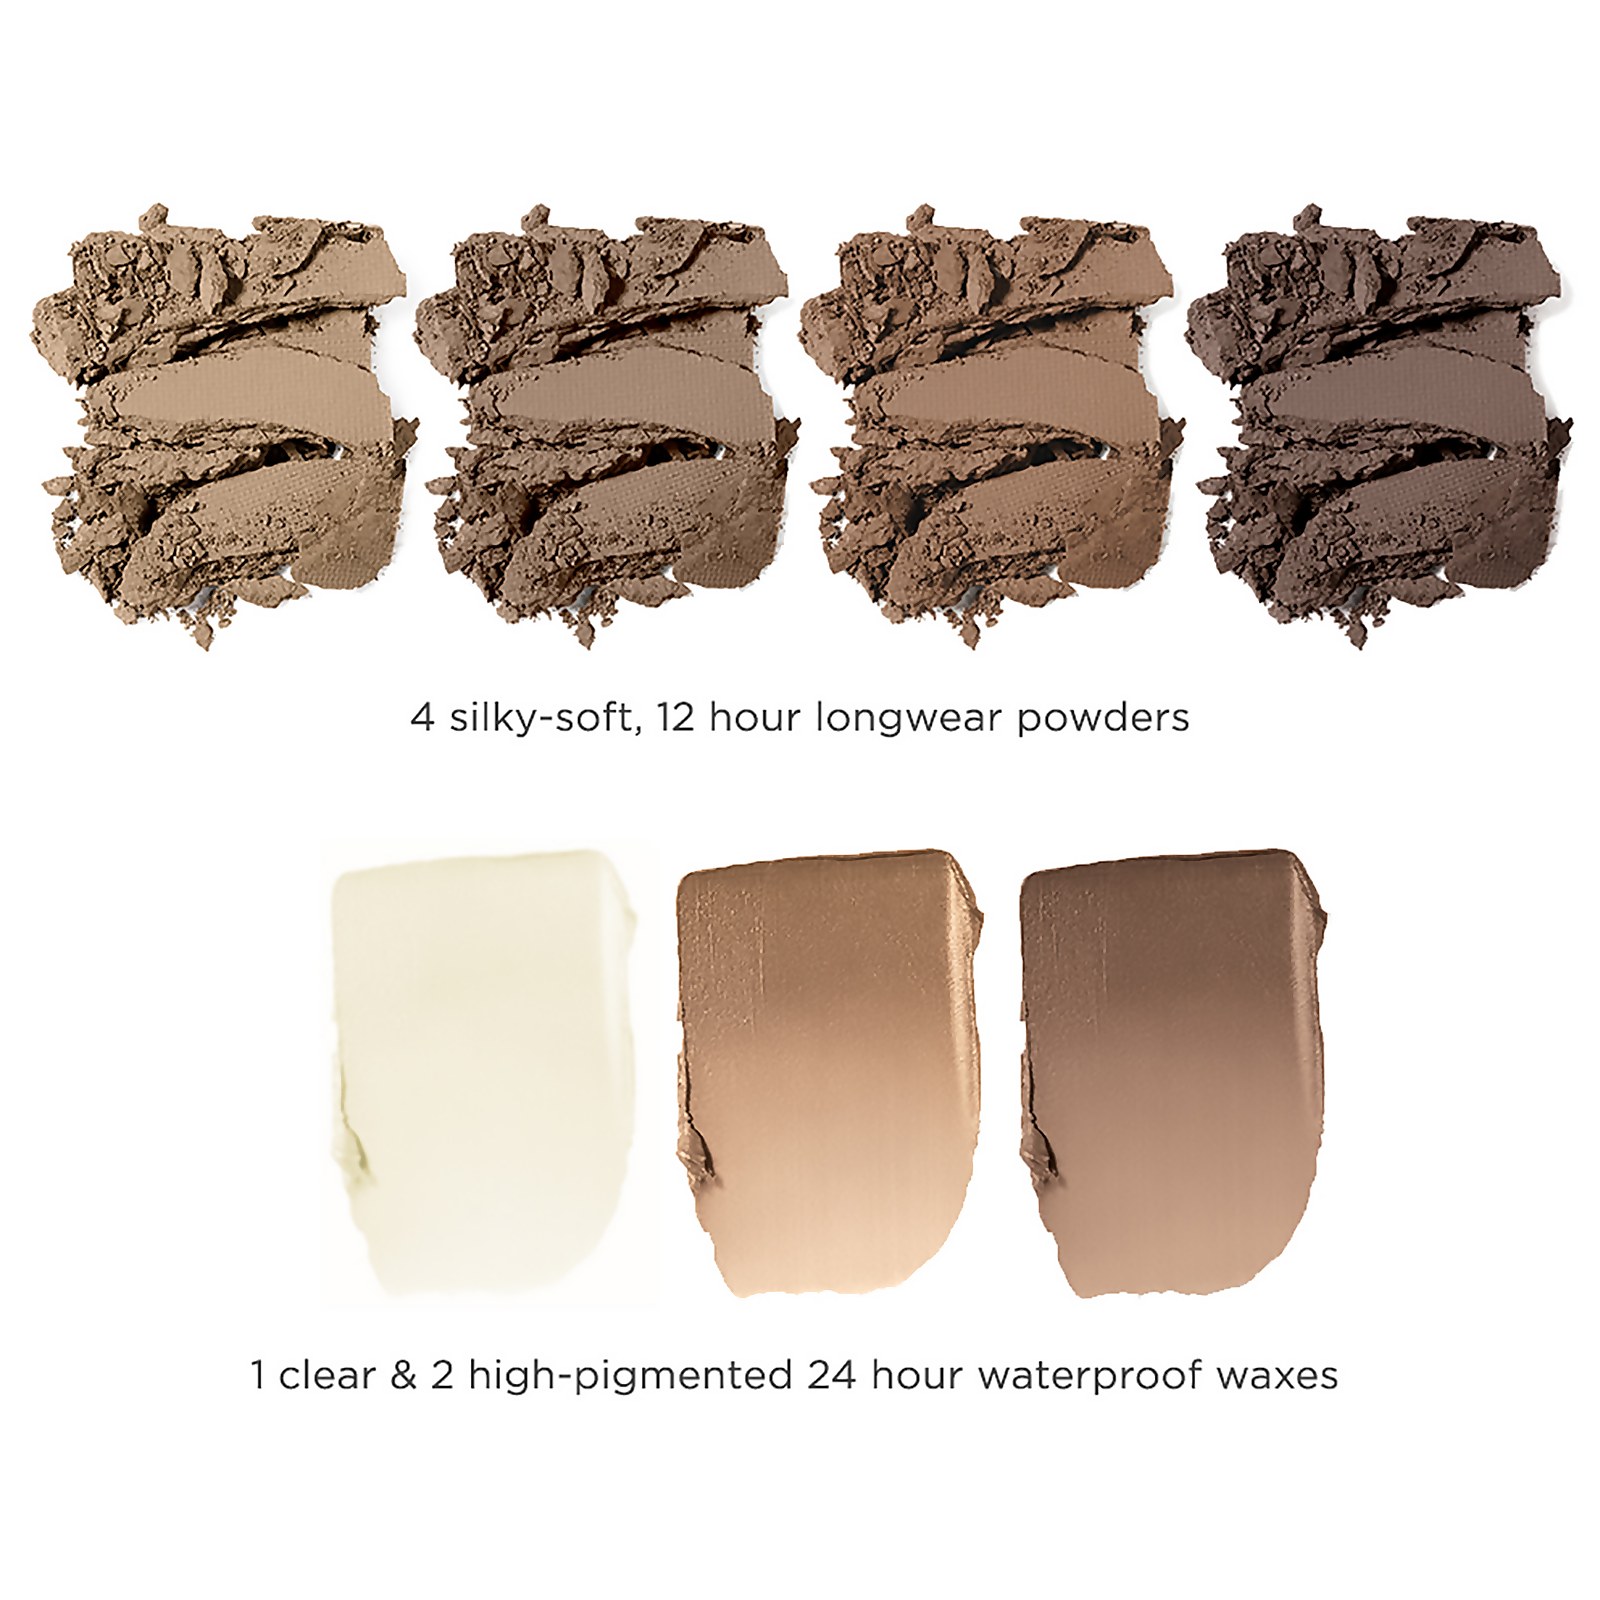 Brow Zings Pro Brow Wax & Powder Palette swatches